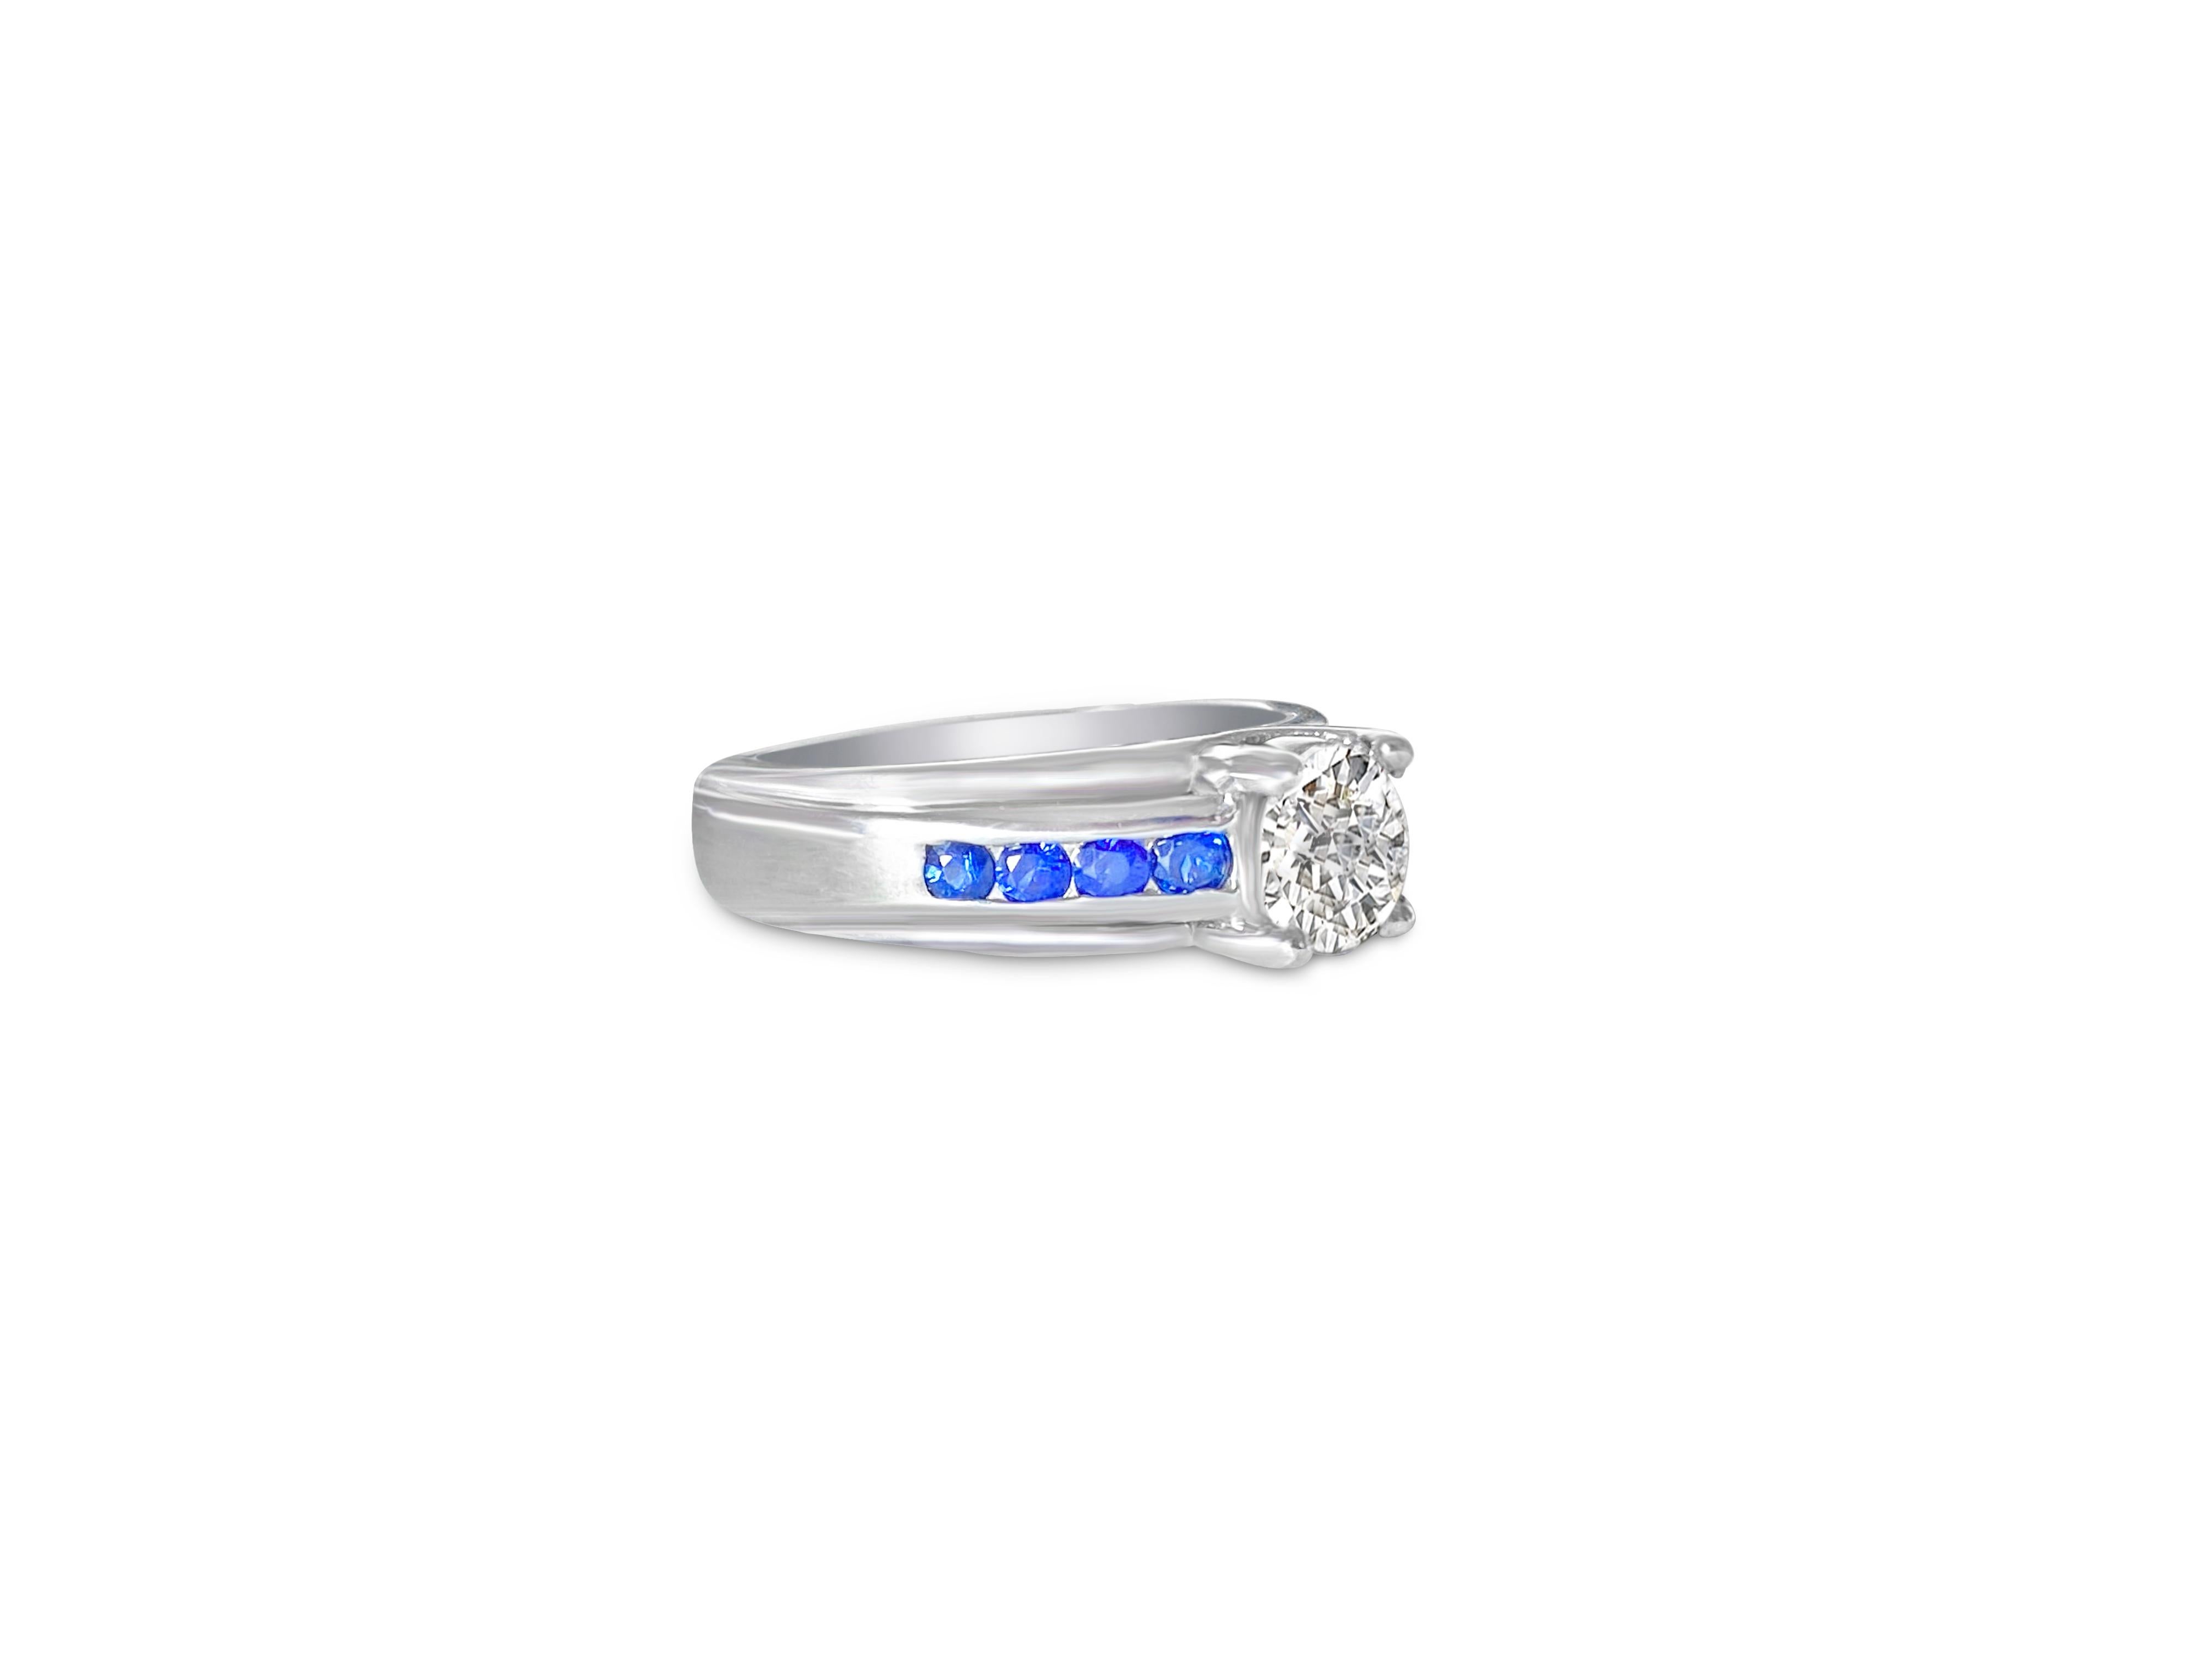 1.70 Carat Diamond and Blue Sapphire Engagement Ring in 18 Karat White Gold In New Condition For Sale In Miami, FL